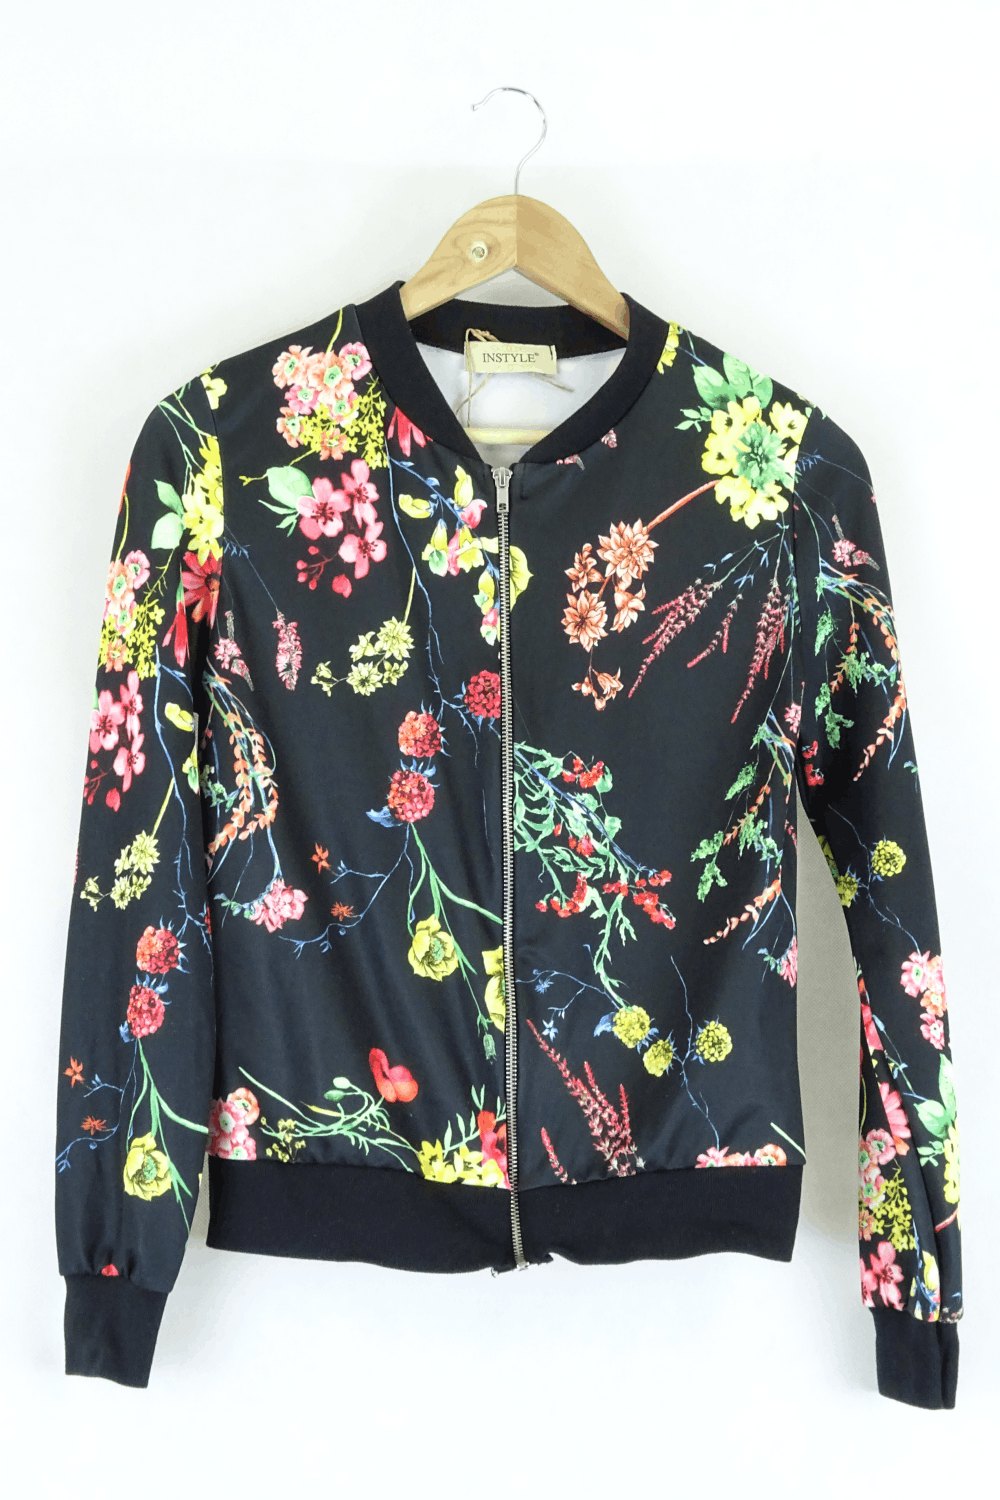 Instyle Floral Jacket S